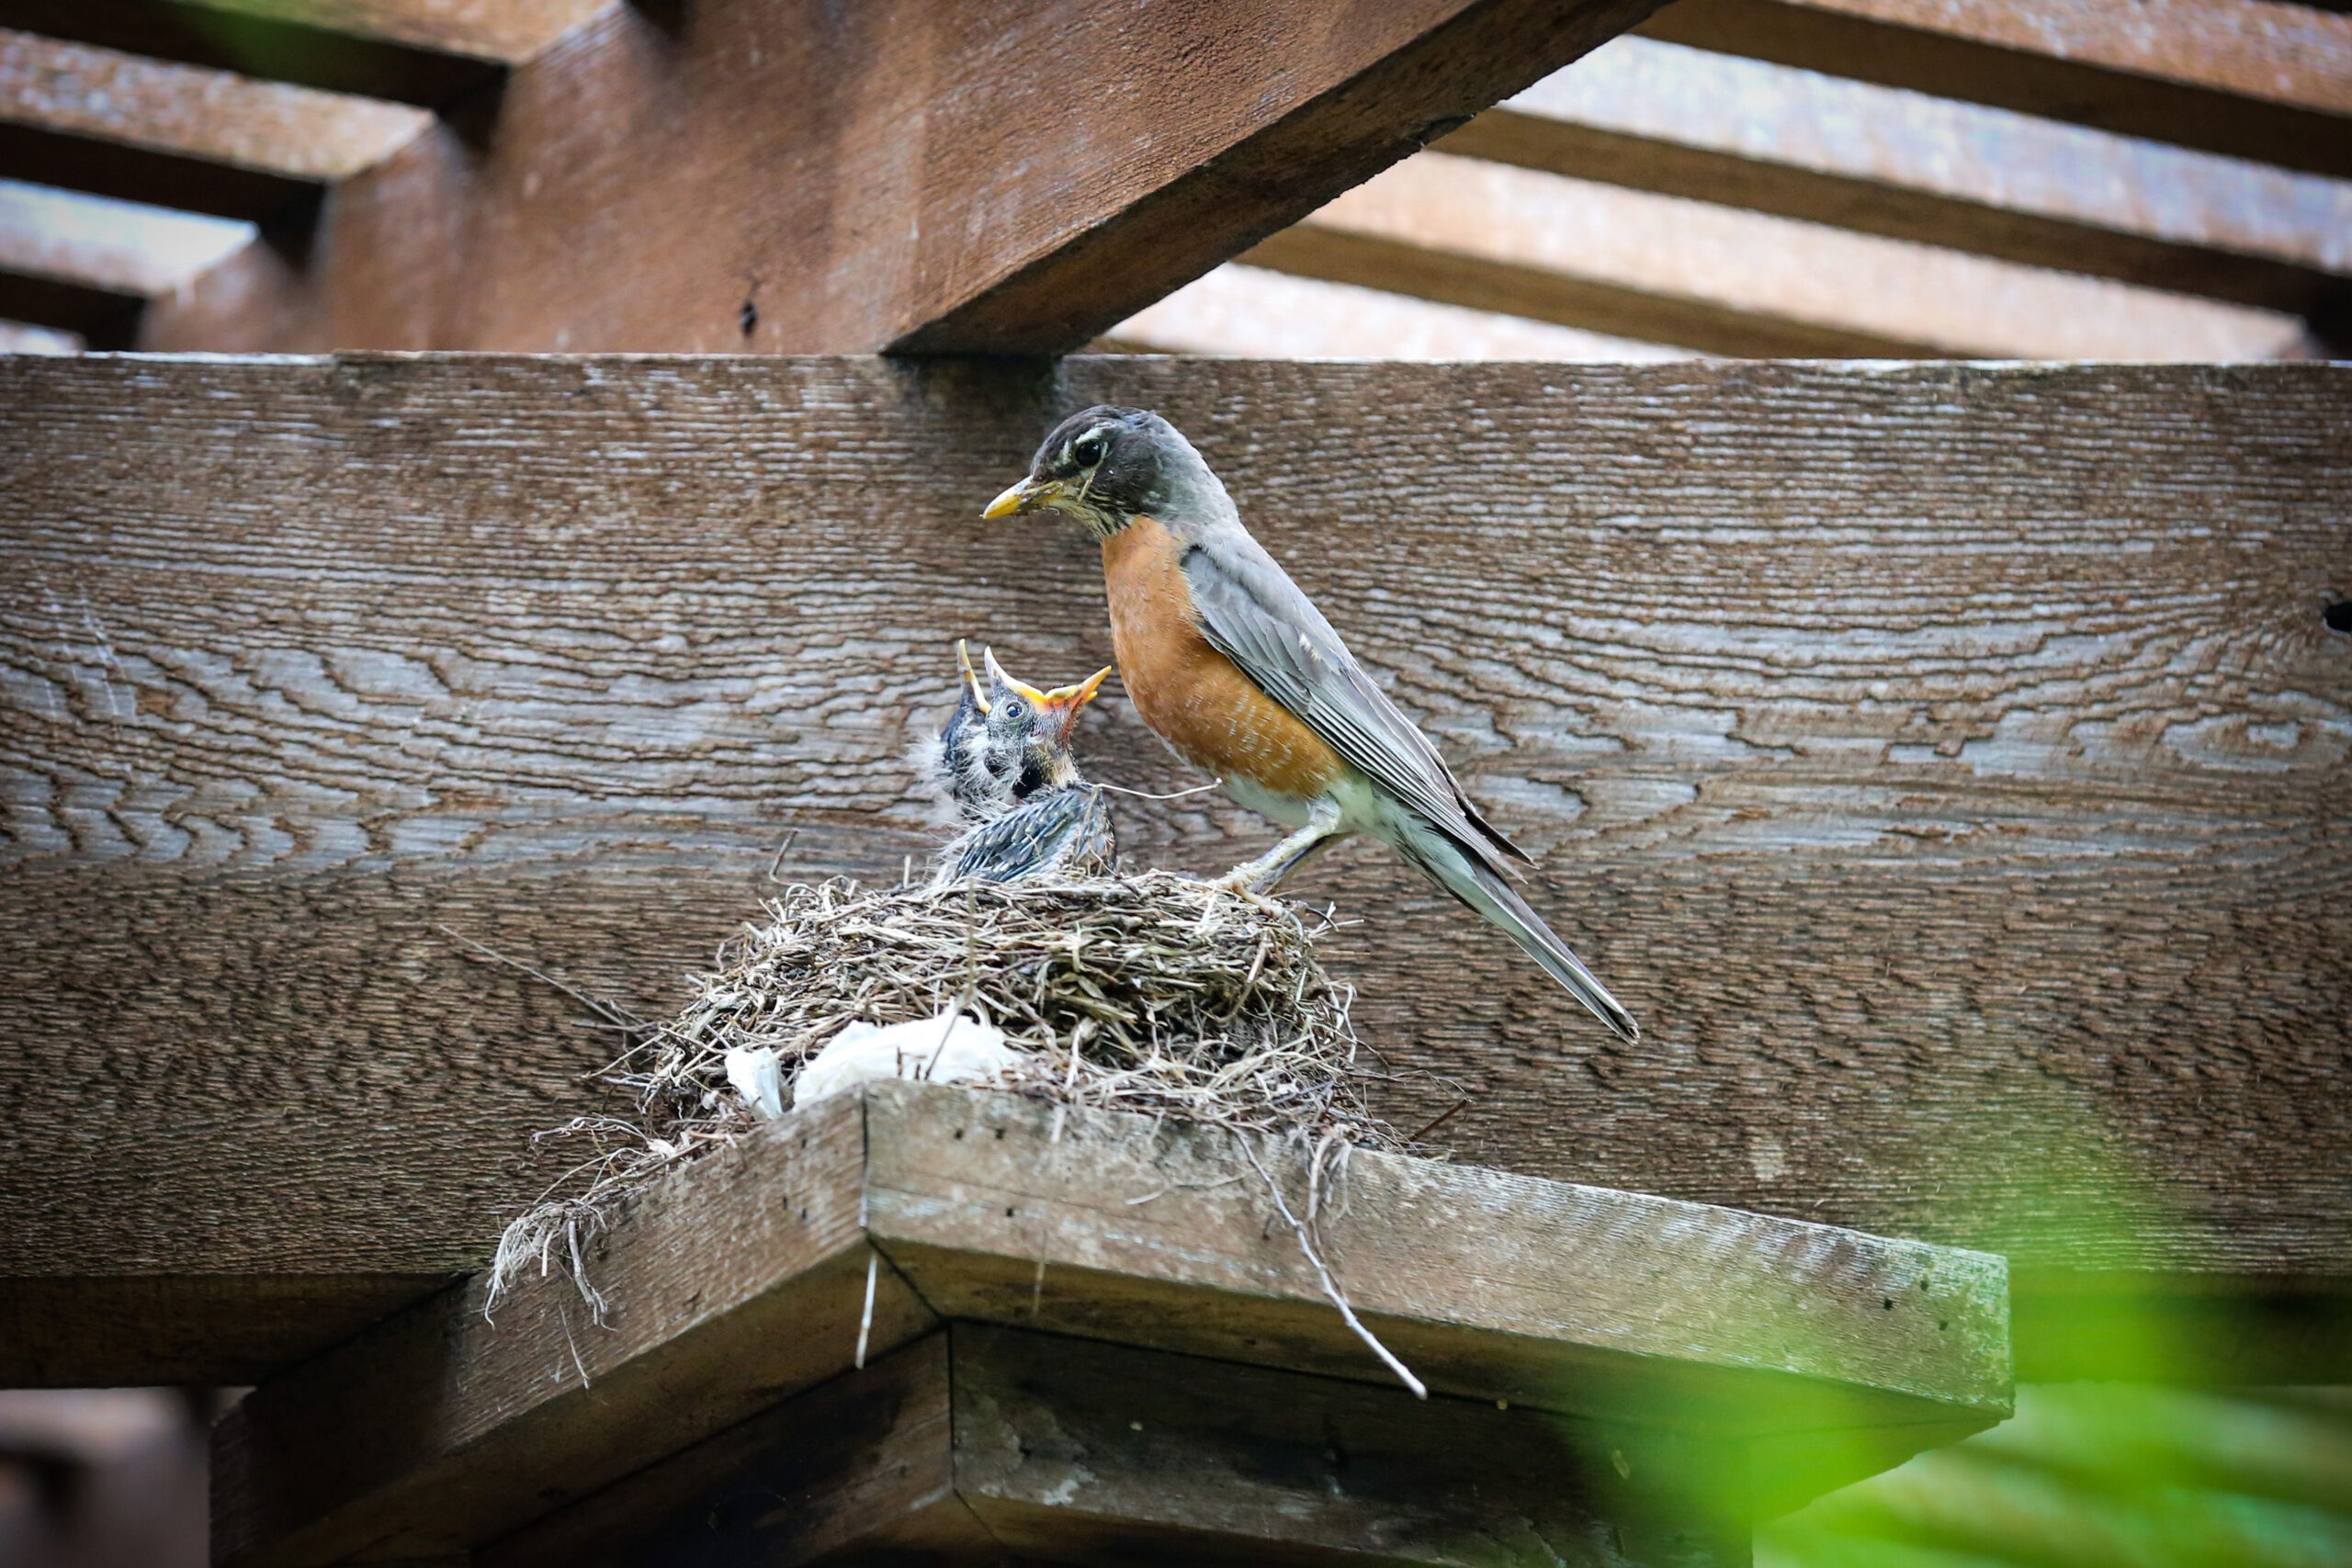 Photo of a mama robin bird stanfing over a nest with two baby robins in it with their beaks wide open.